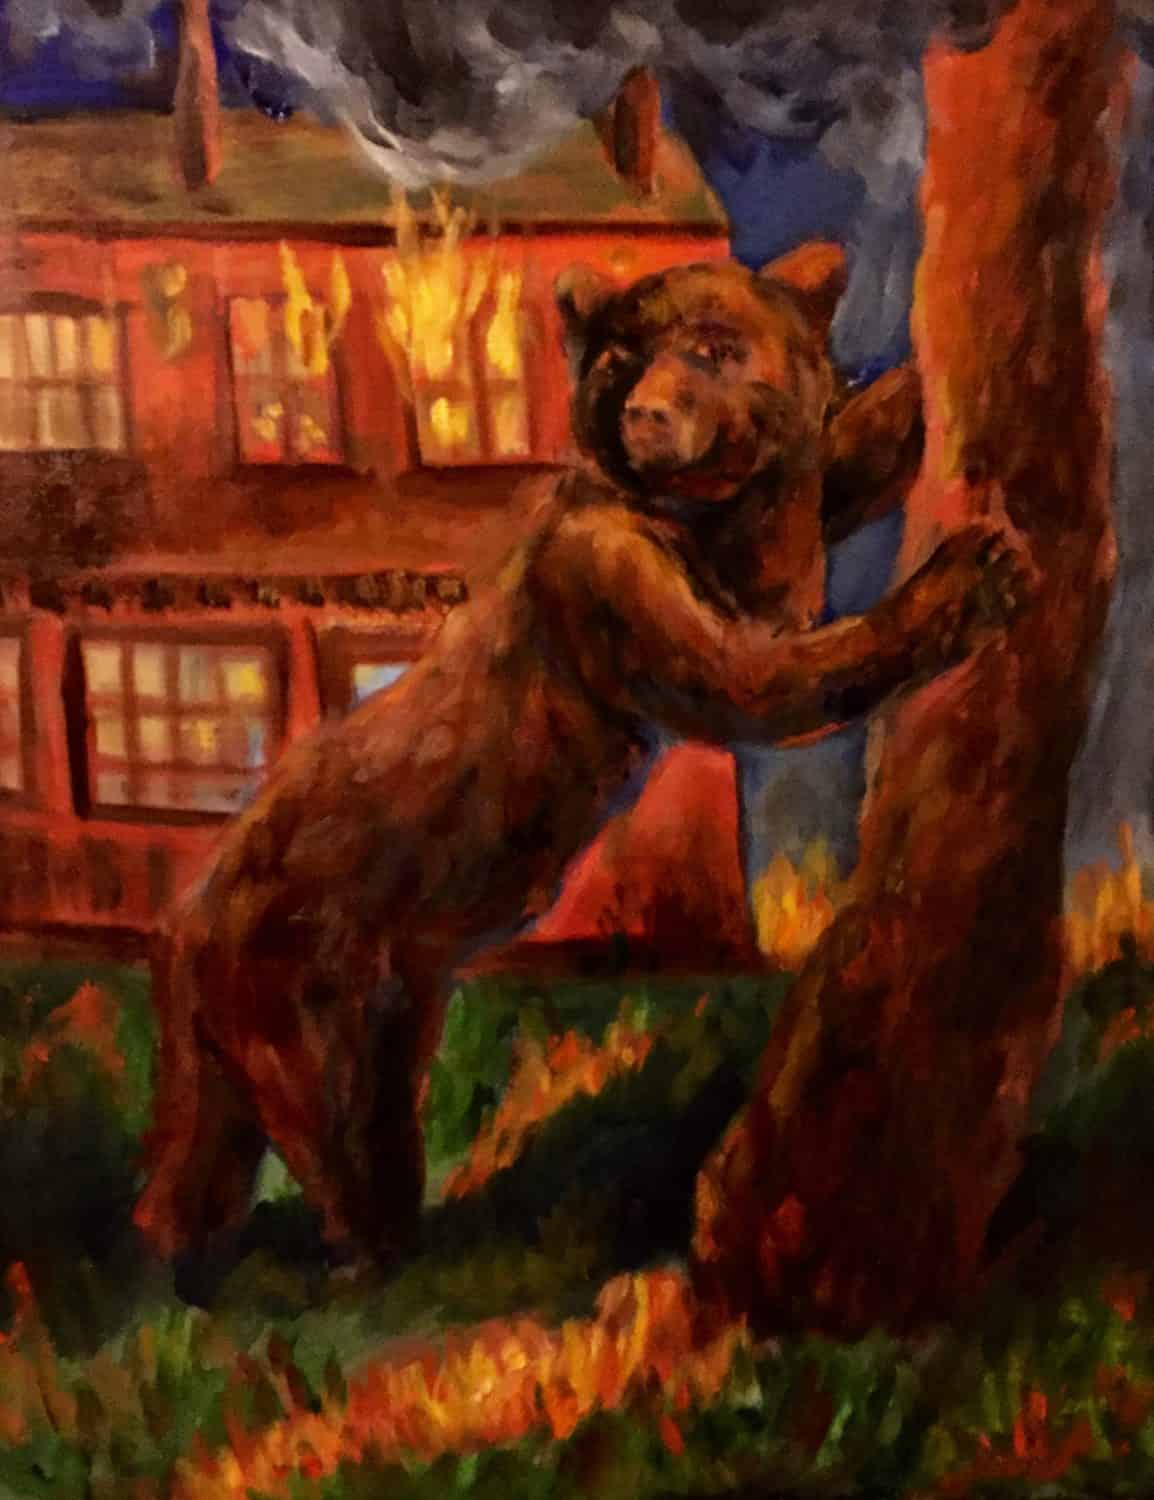 bear leaning on tree with house on fire behind the bear